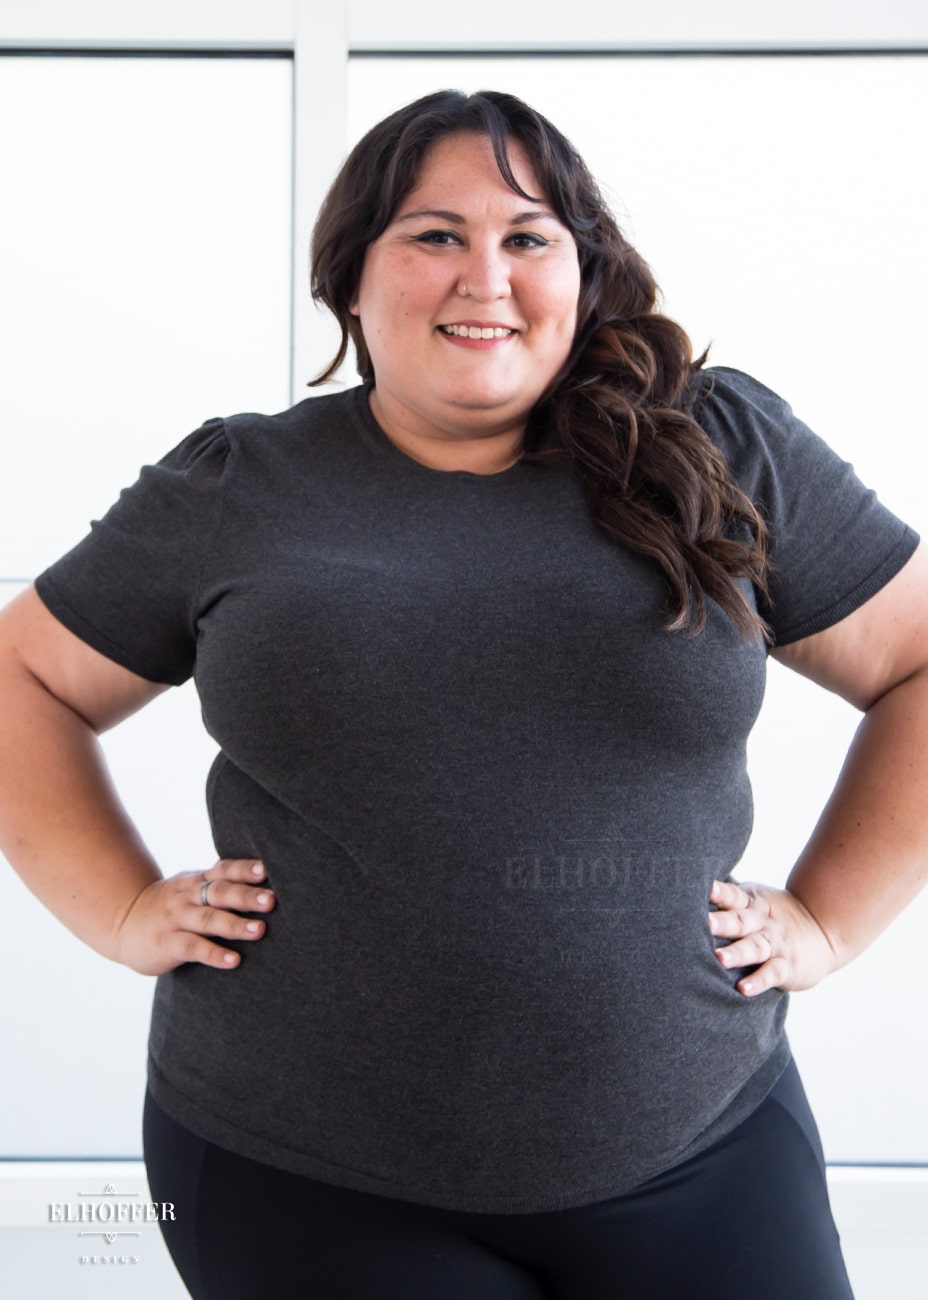 Alysia, a sun kissed skin 2xl model with long wavy dark brown hair, is smiling while wearing a short sleeve light weight charcoal grey knit top. The top hits about mid hip in length and the sleeves have pleated gathering at the shoulders.